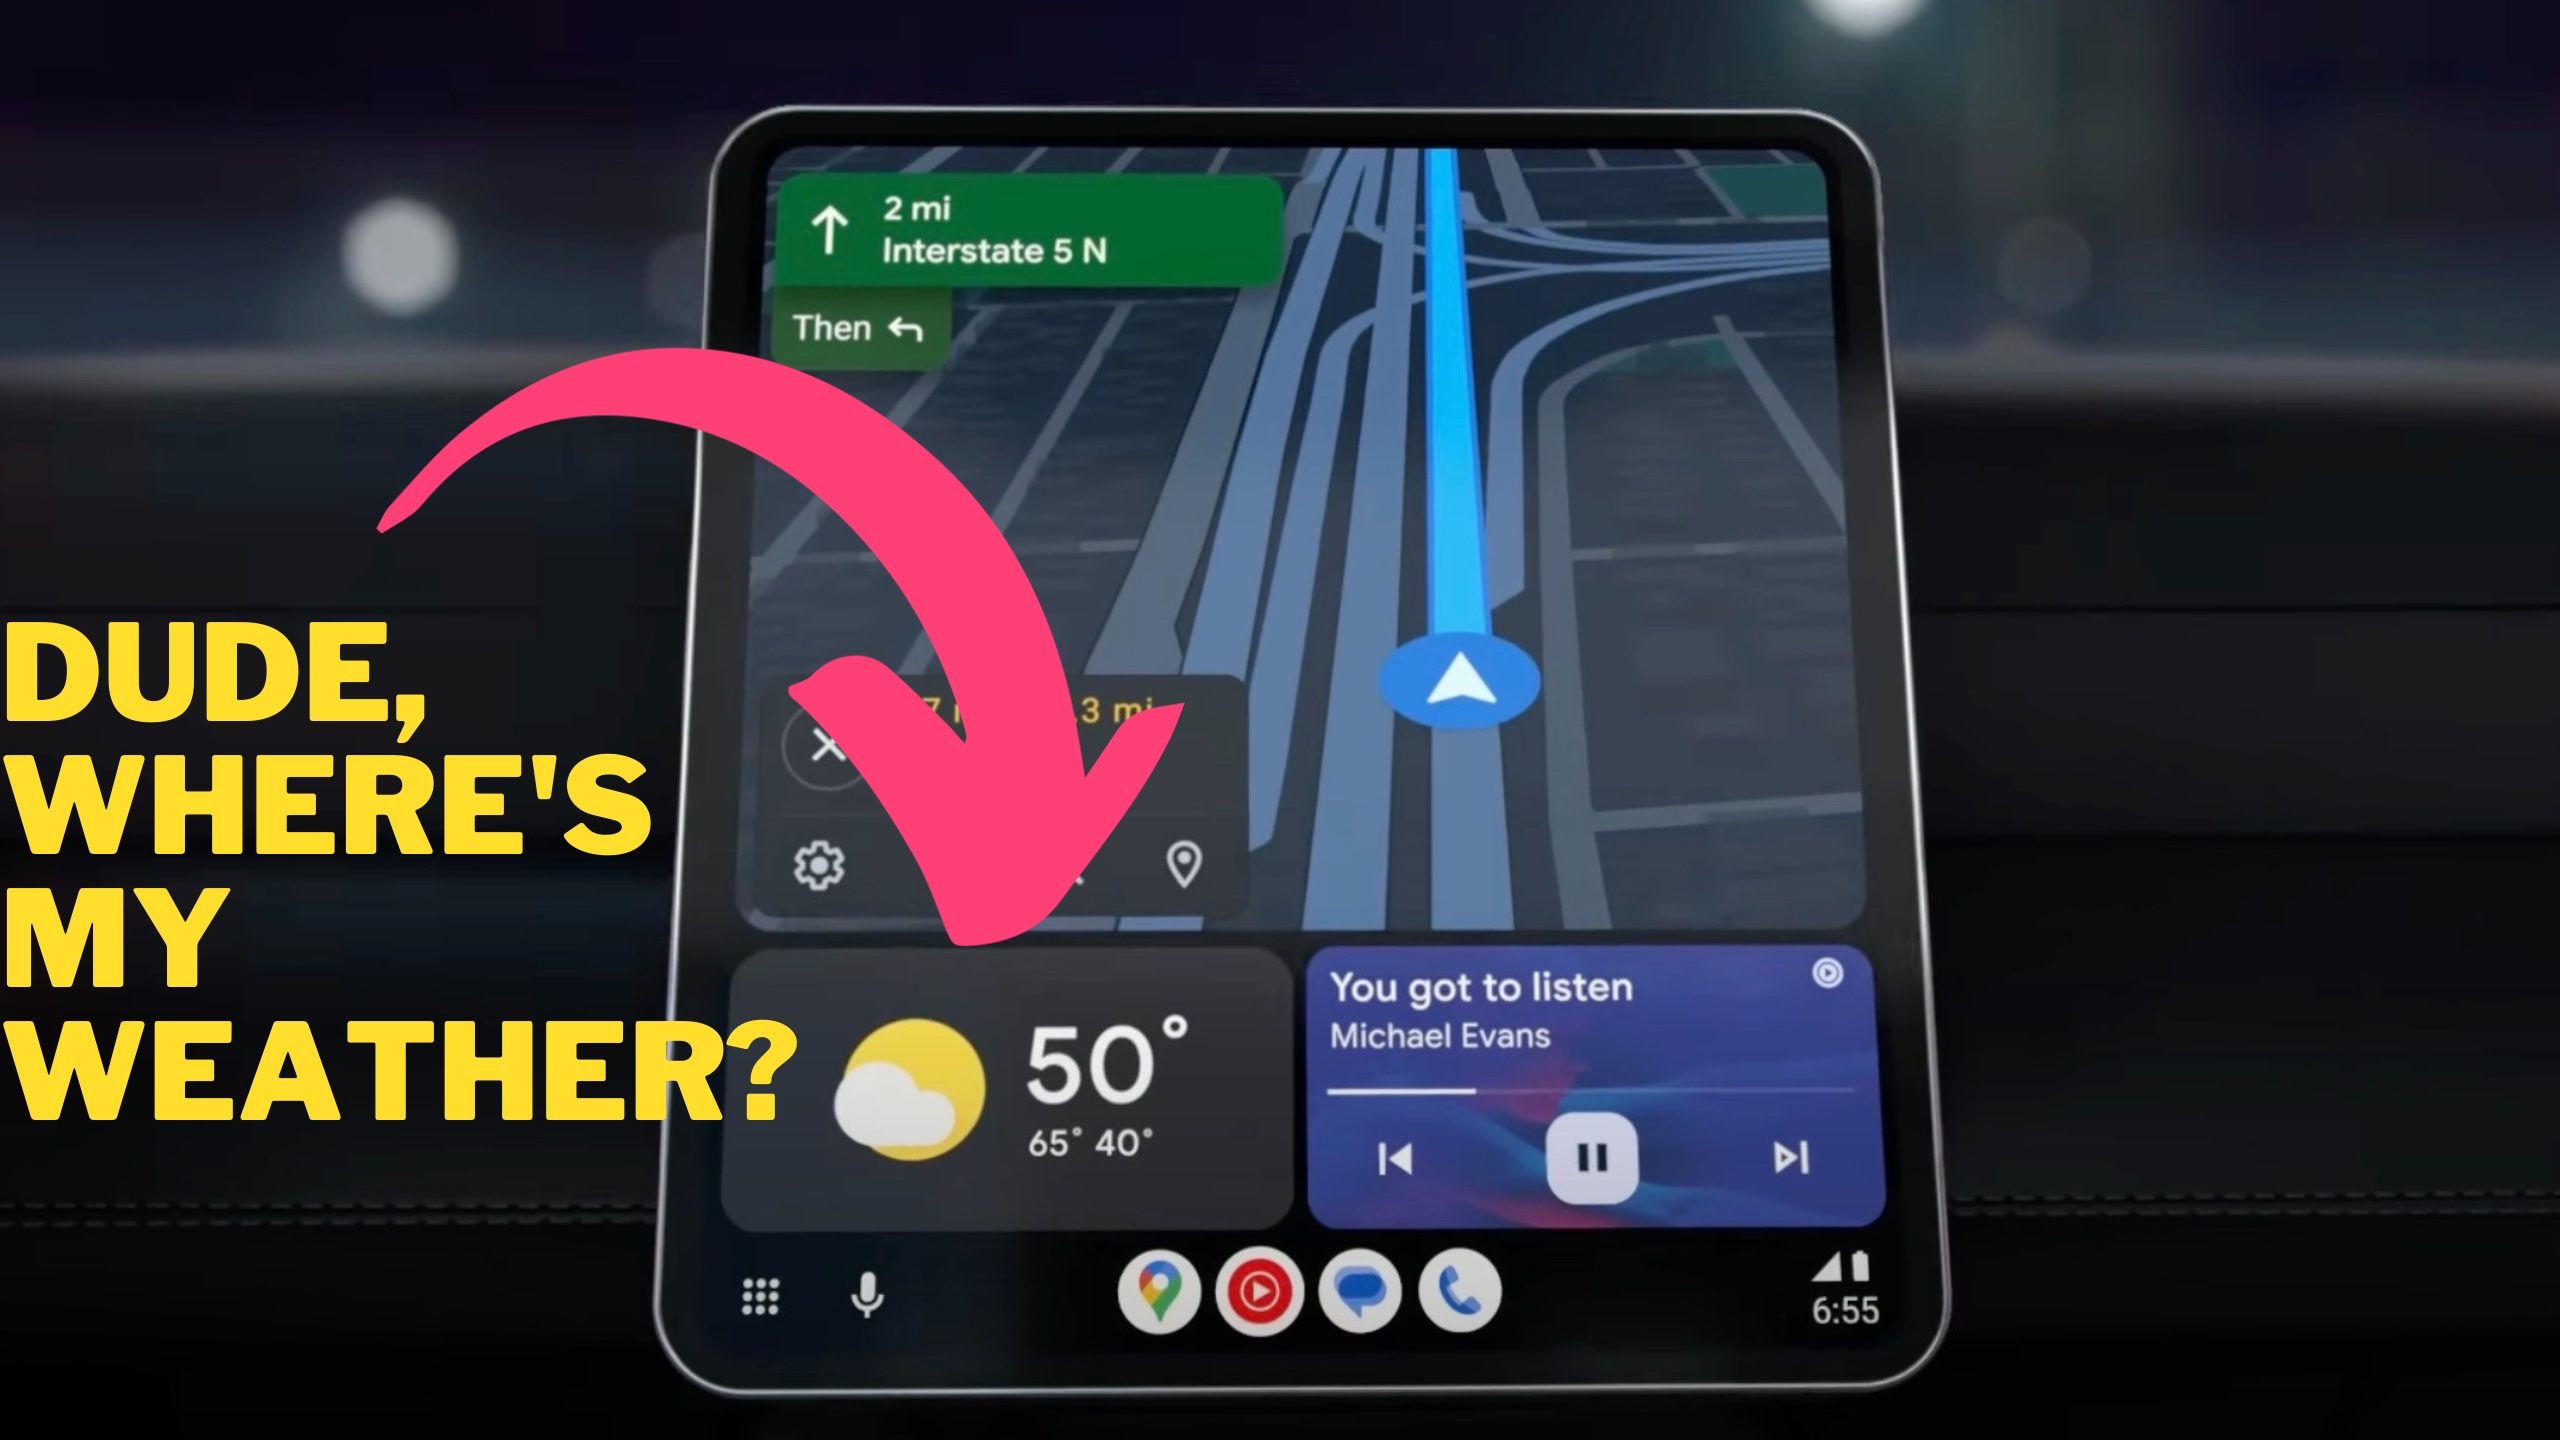 Why a top feature is not available on Android Auto Coolwalk